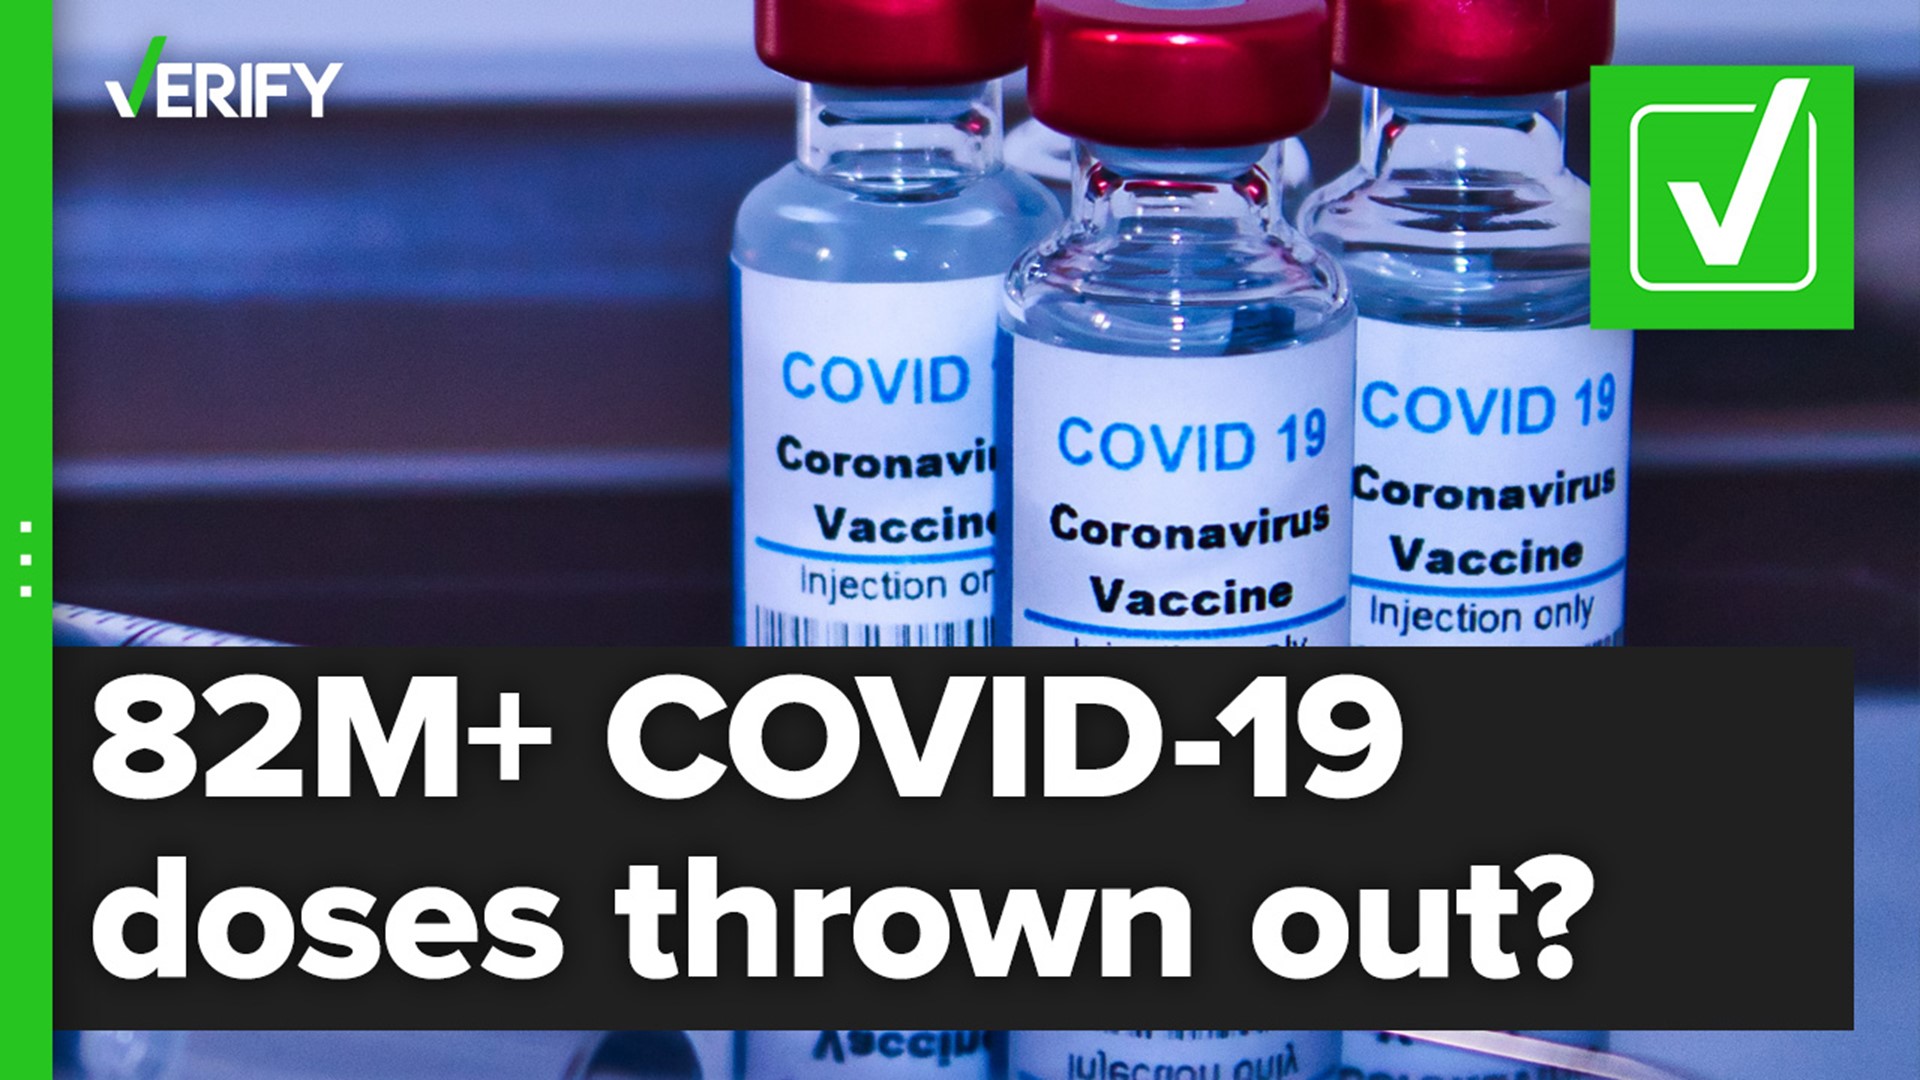 As of June 9, CDC data show over 87 million COVID-19 vaccine doses were thrown out in the U.S., due to a variety of reasons, including vaccine vial expiration.